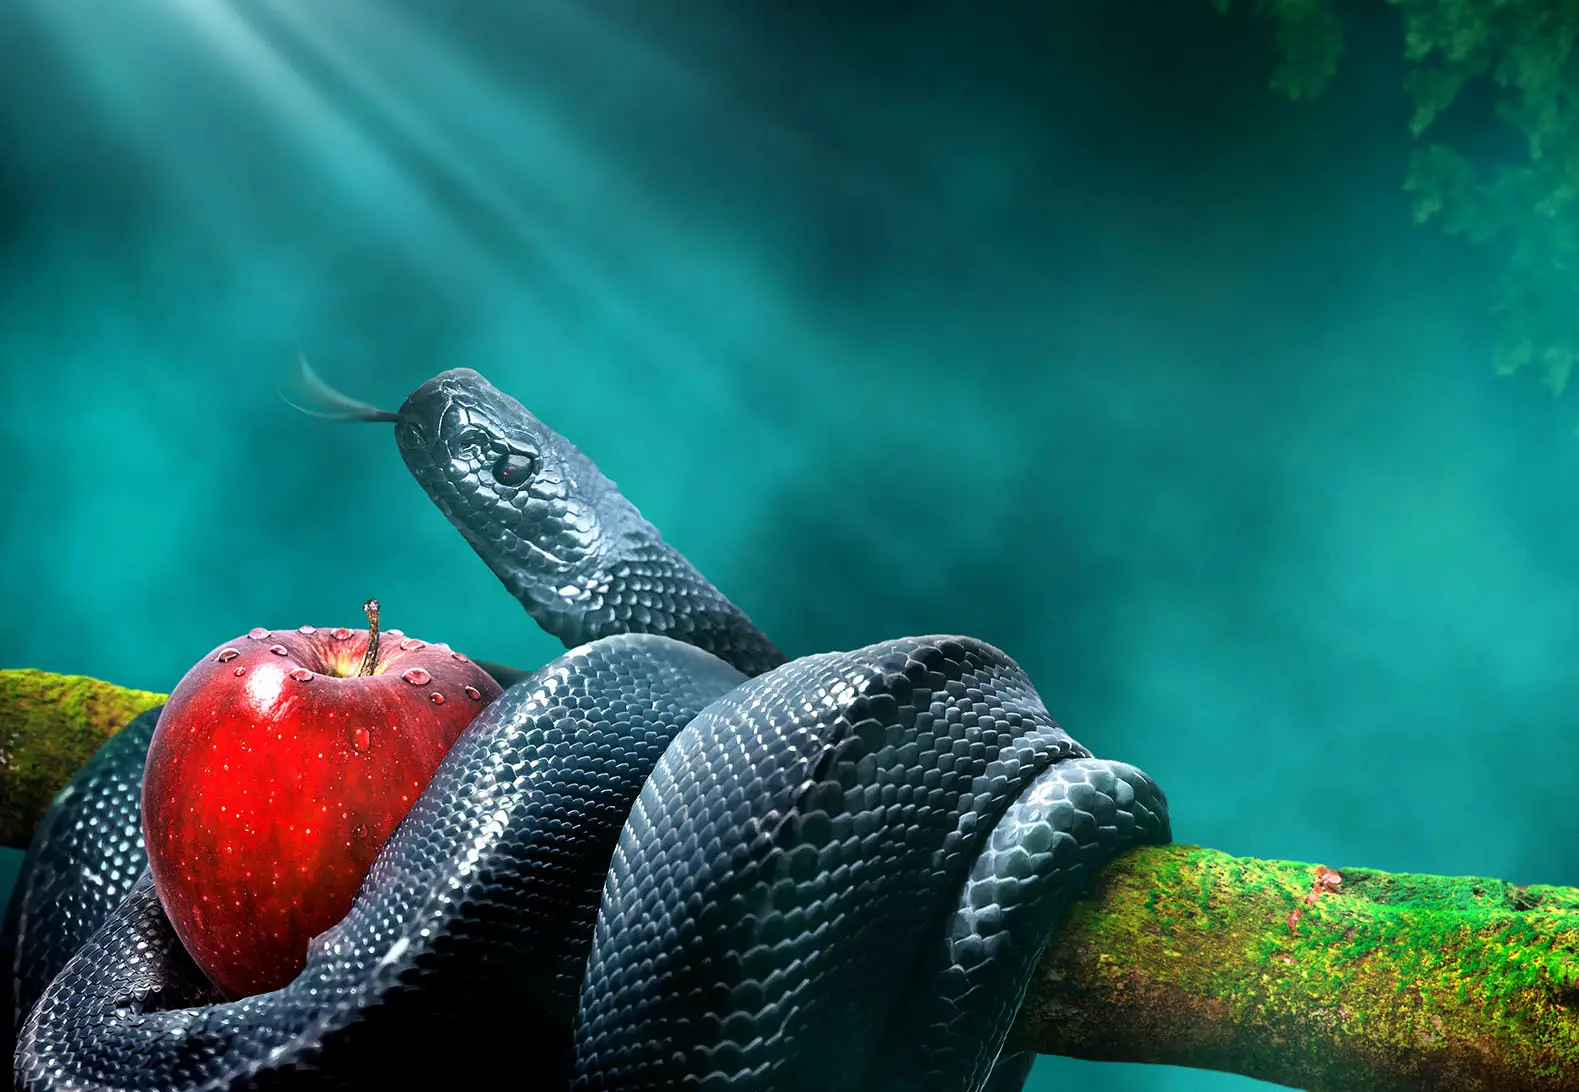 Black snake with an apple fruit in a branch of a tree